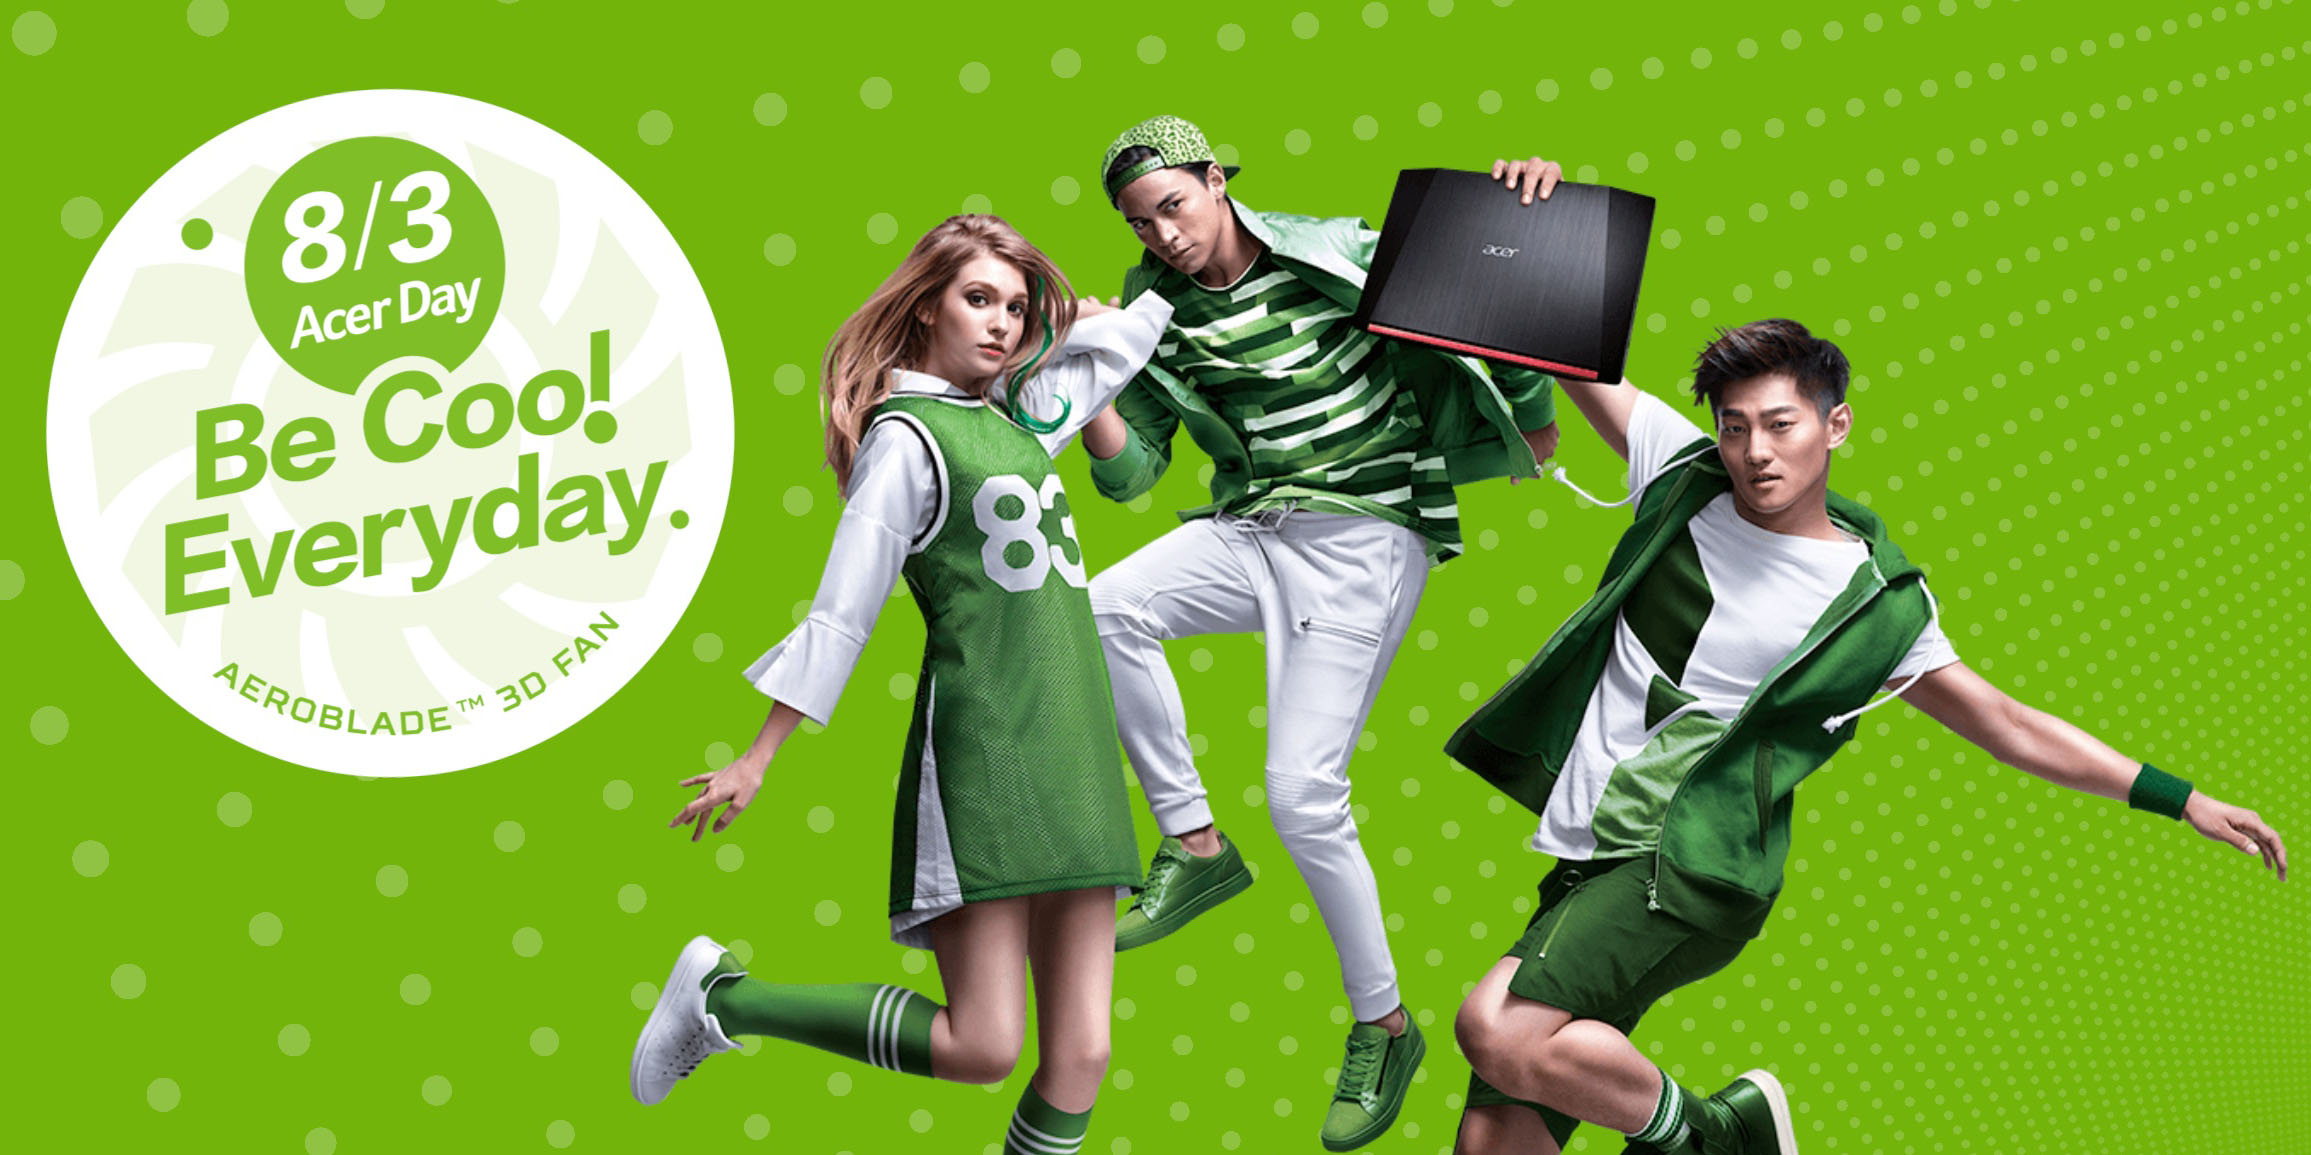 Acer snnounces “Acer Day” in Pan Asia Pacific on August 3